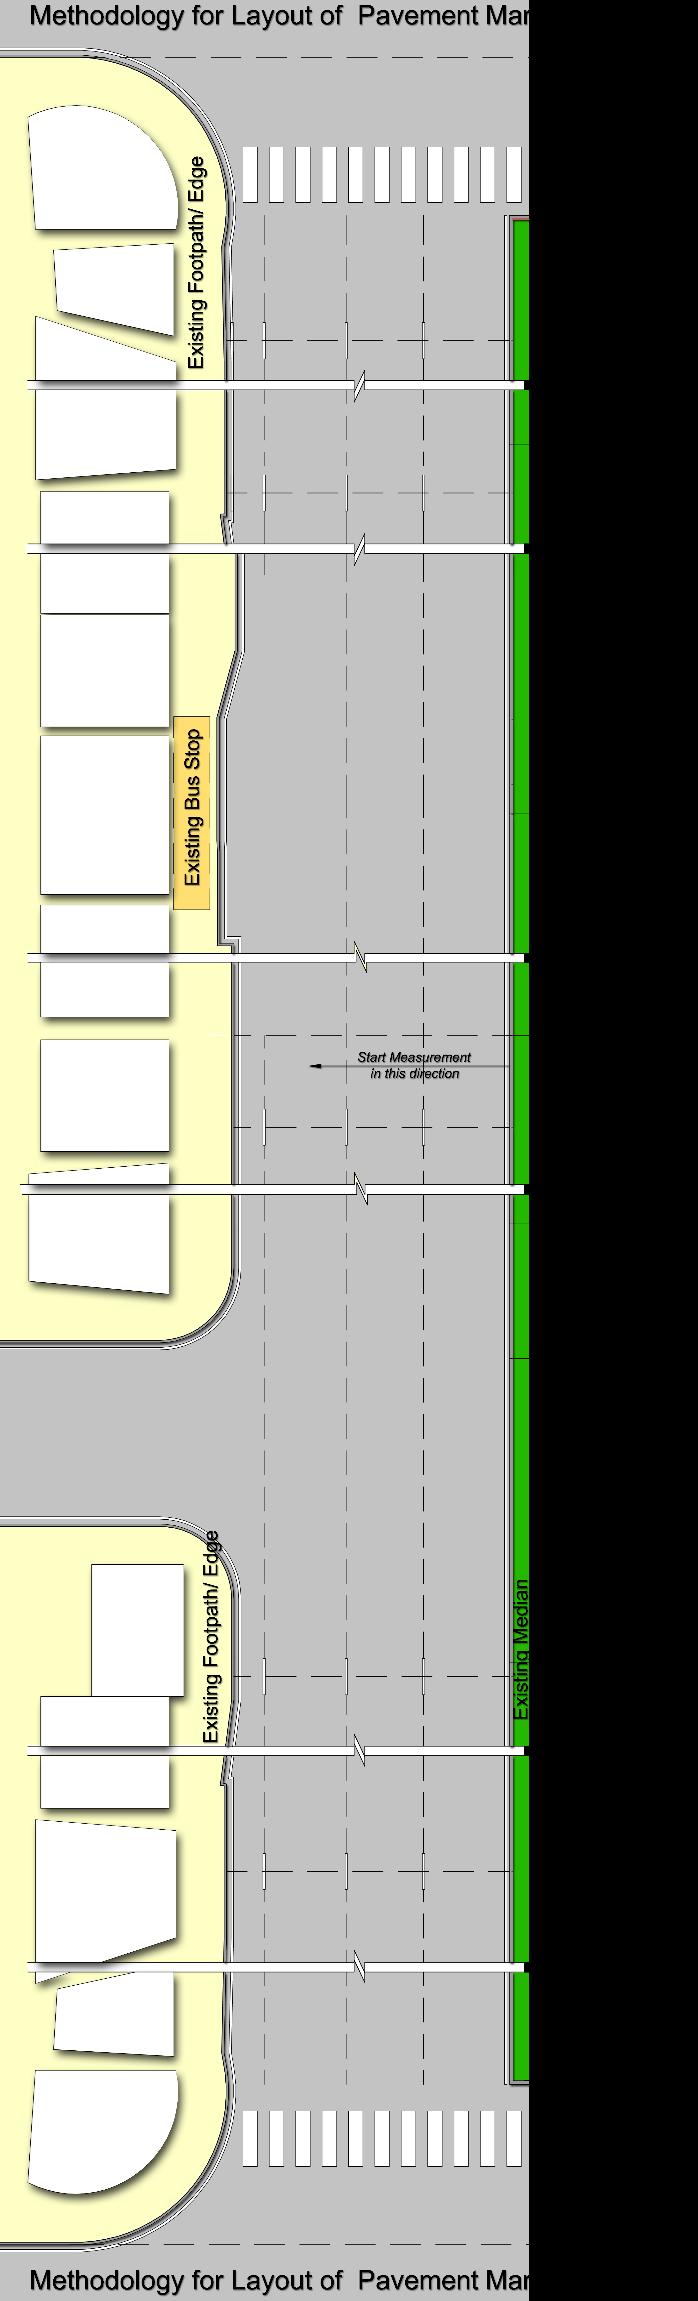 Ignore measurement lines and widths recorded at planned road widening such as those at bus bays or planned street parking bays.